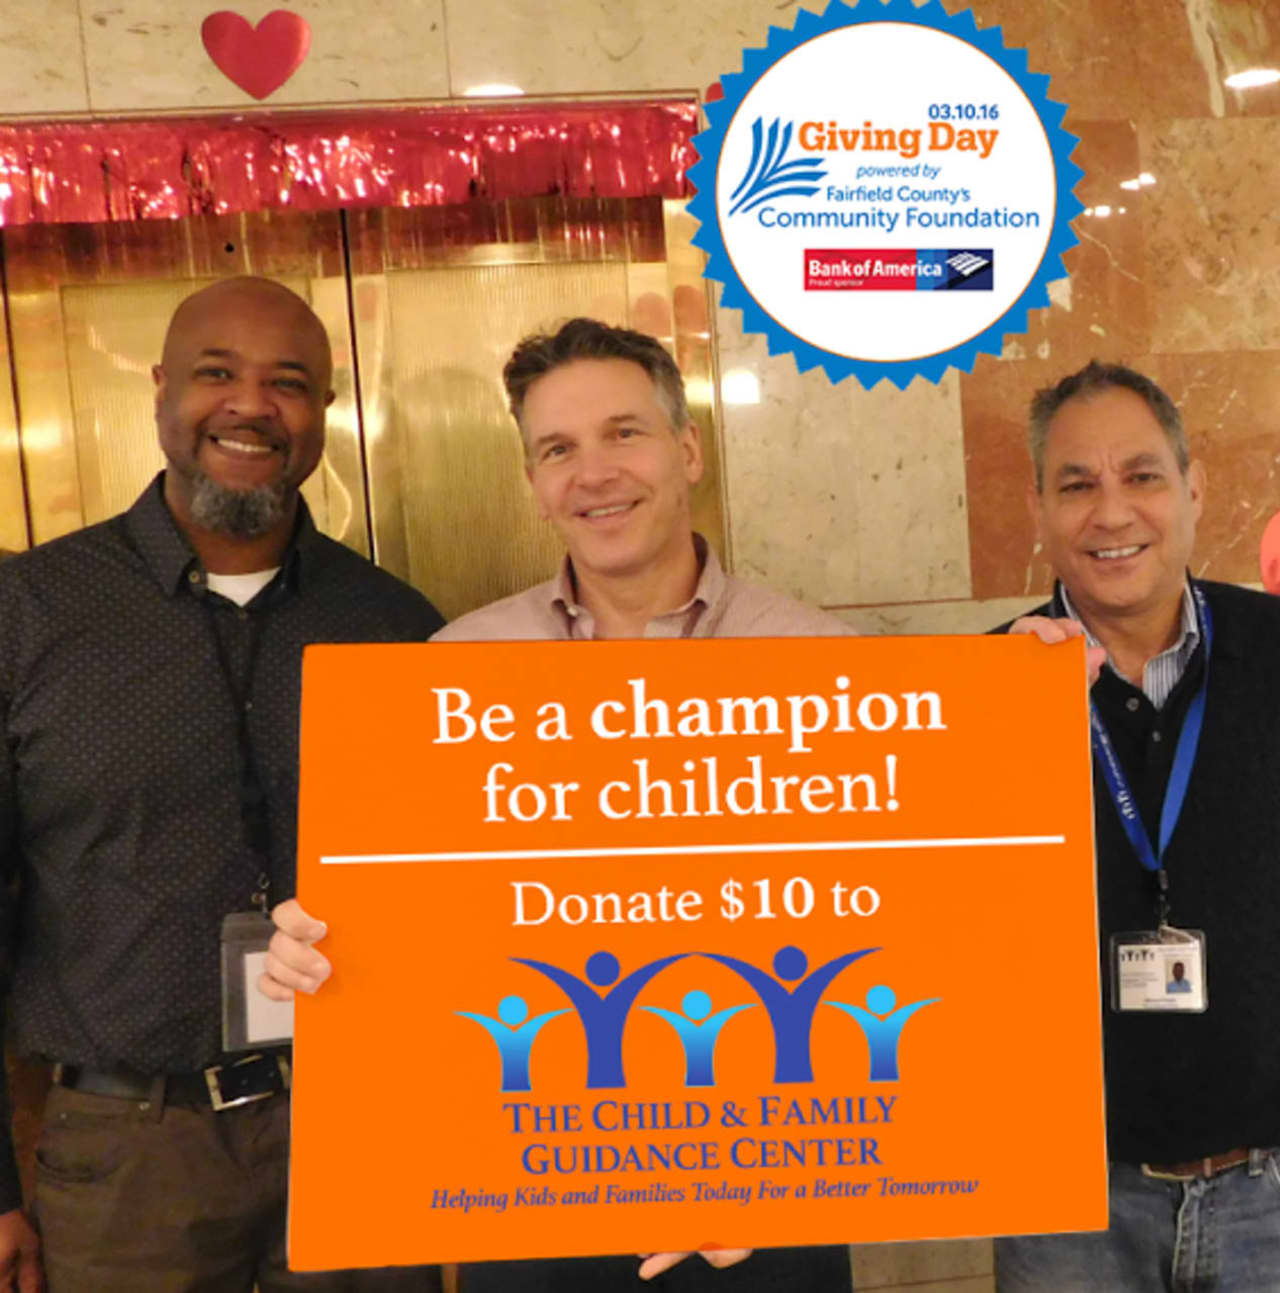 Left to right are Terril Pile, Outpatient Director, Child & Family Guidance Center; Dr. Christopher Bogart, CEO, The Southfield Center for Development; and Michael Patota, President/CEO, Child & Family Guidance Center.